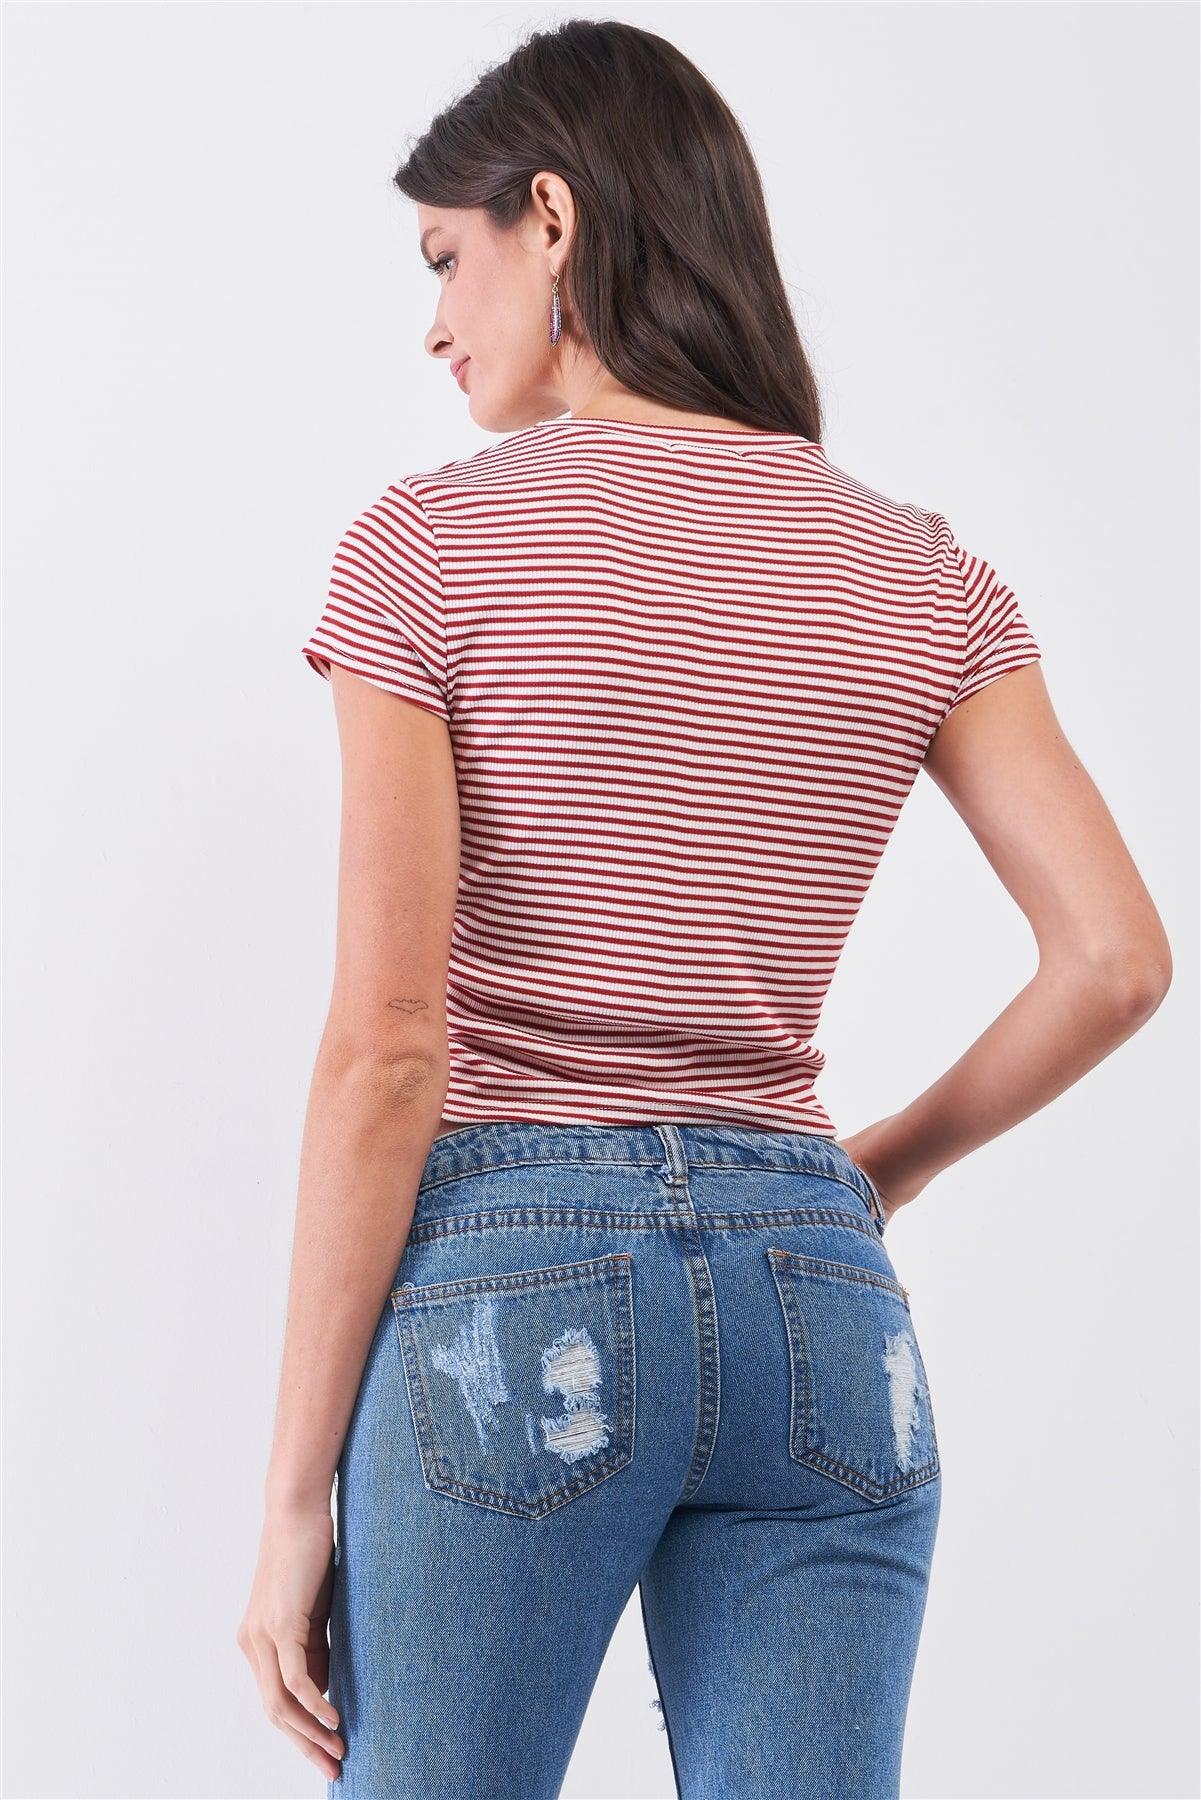 Retro Vibe Burgundy Striped Crew Neck Front Twist Detail Fitted Crop Top /2-2-2